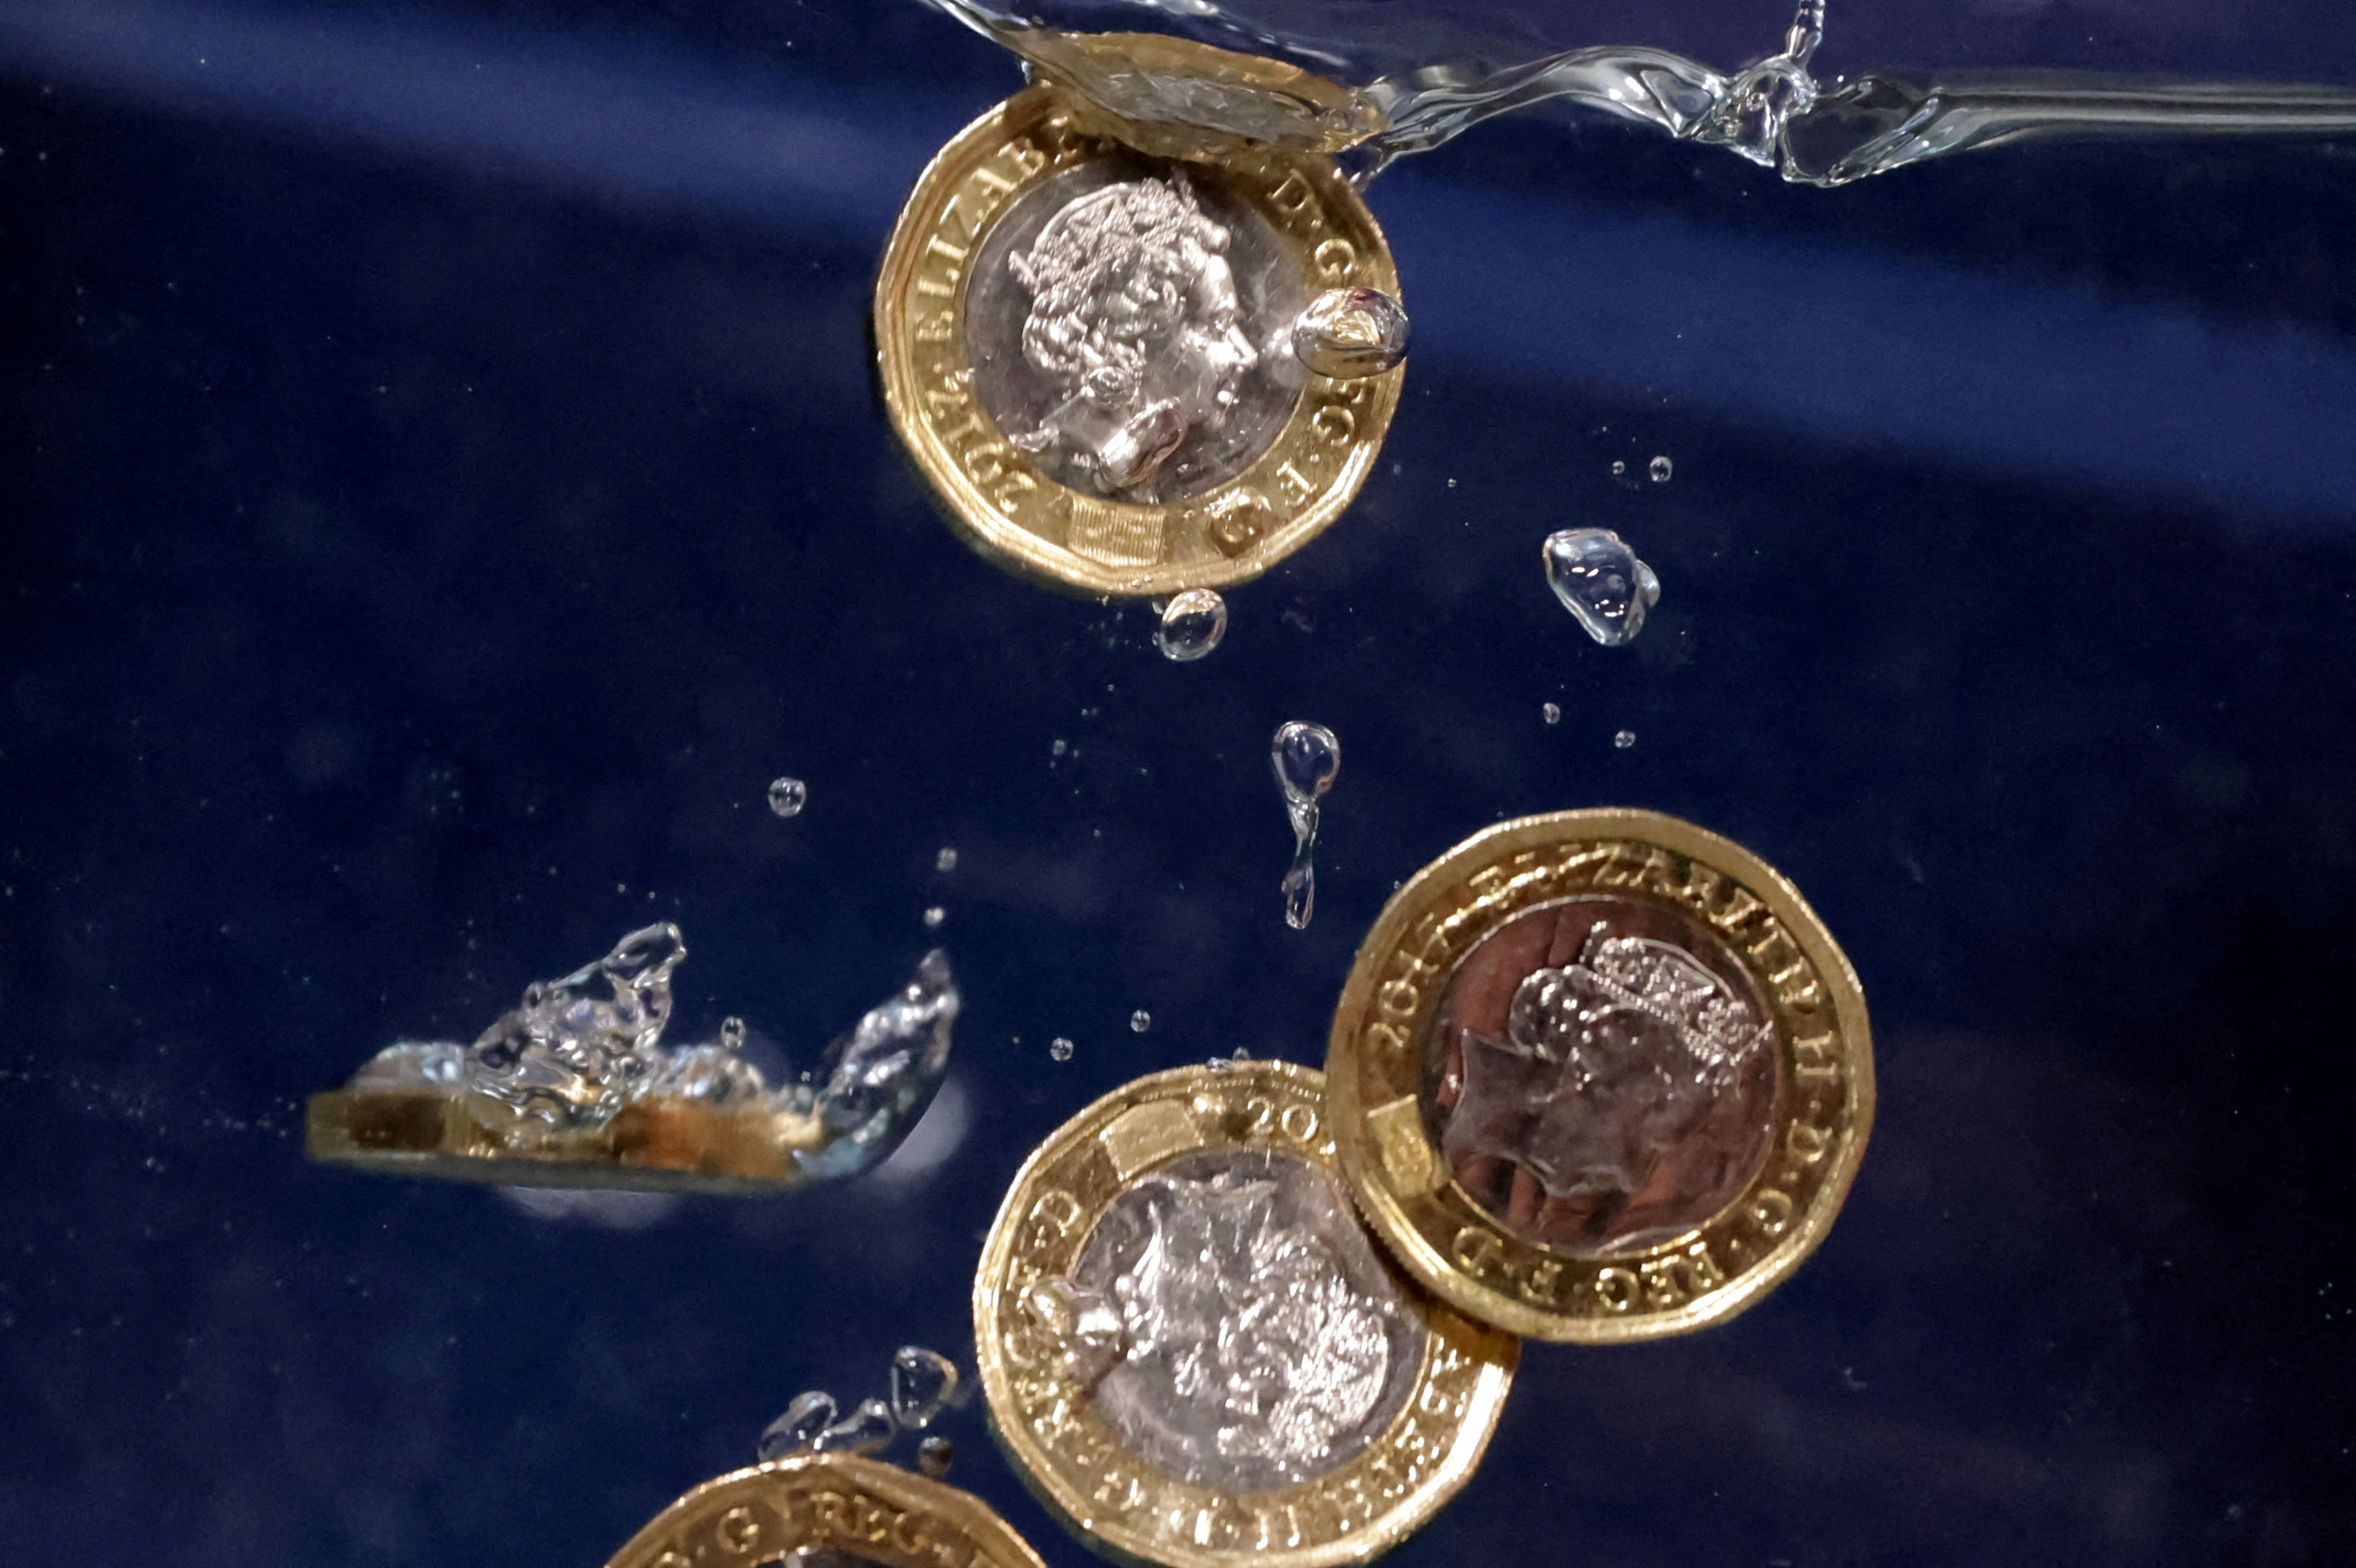 Illustration shows Pound coins plunging into water